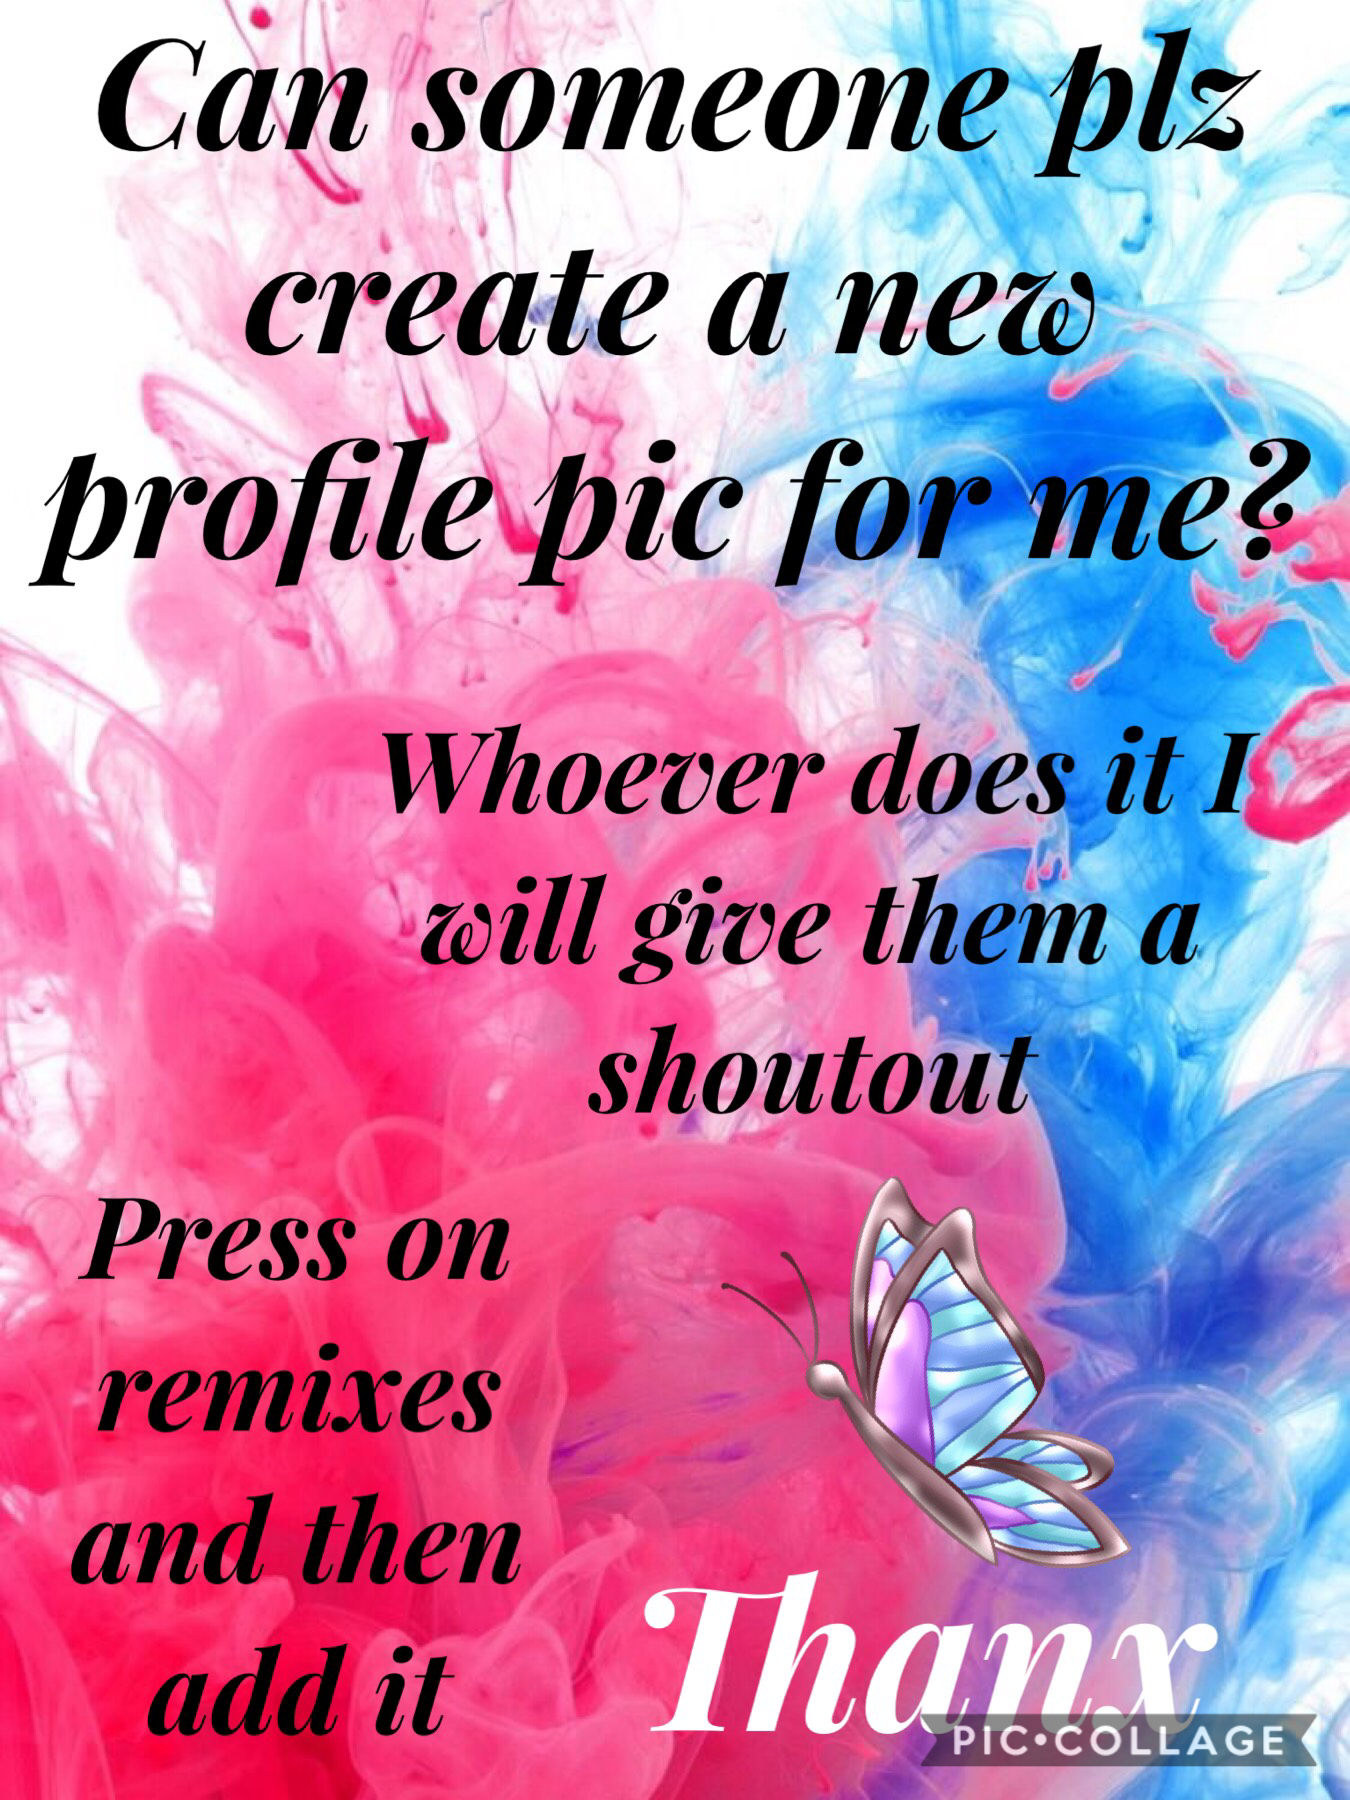 Please can you make me a profile pic

I will give you a shoutout!